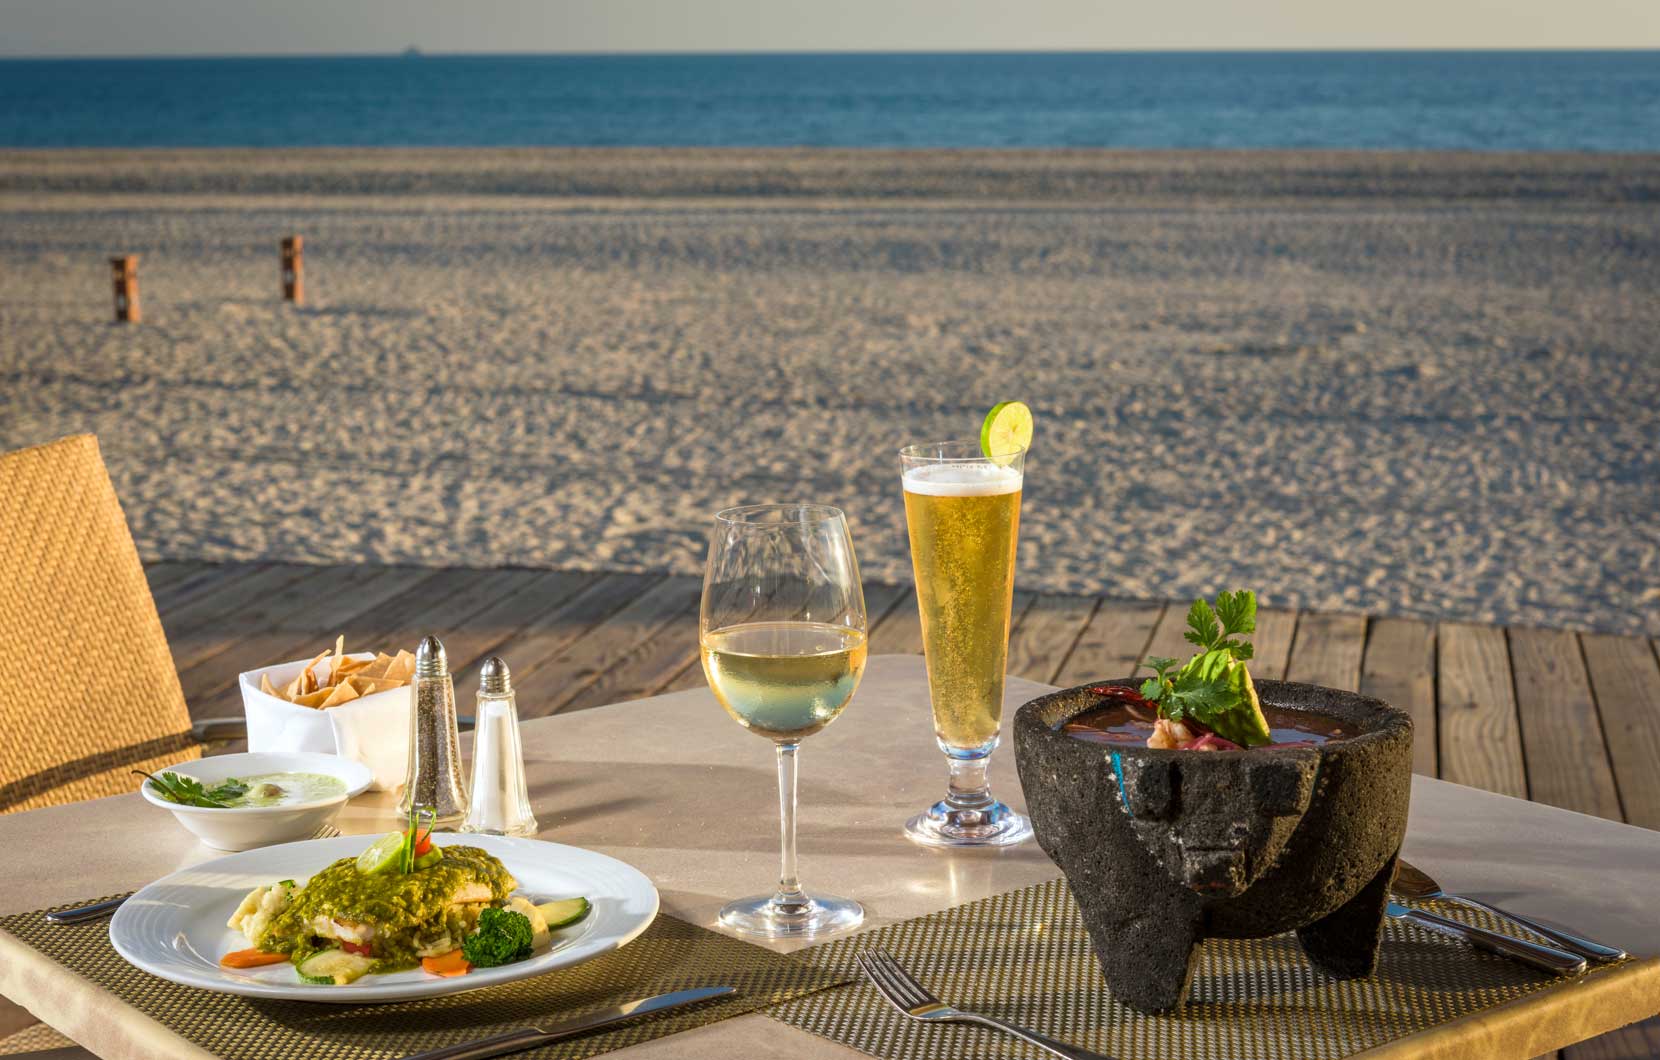 Ceviche at Balché restaurant is served beachside in a pig molcajete.